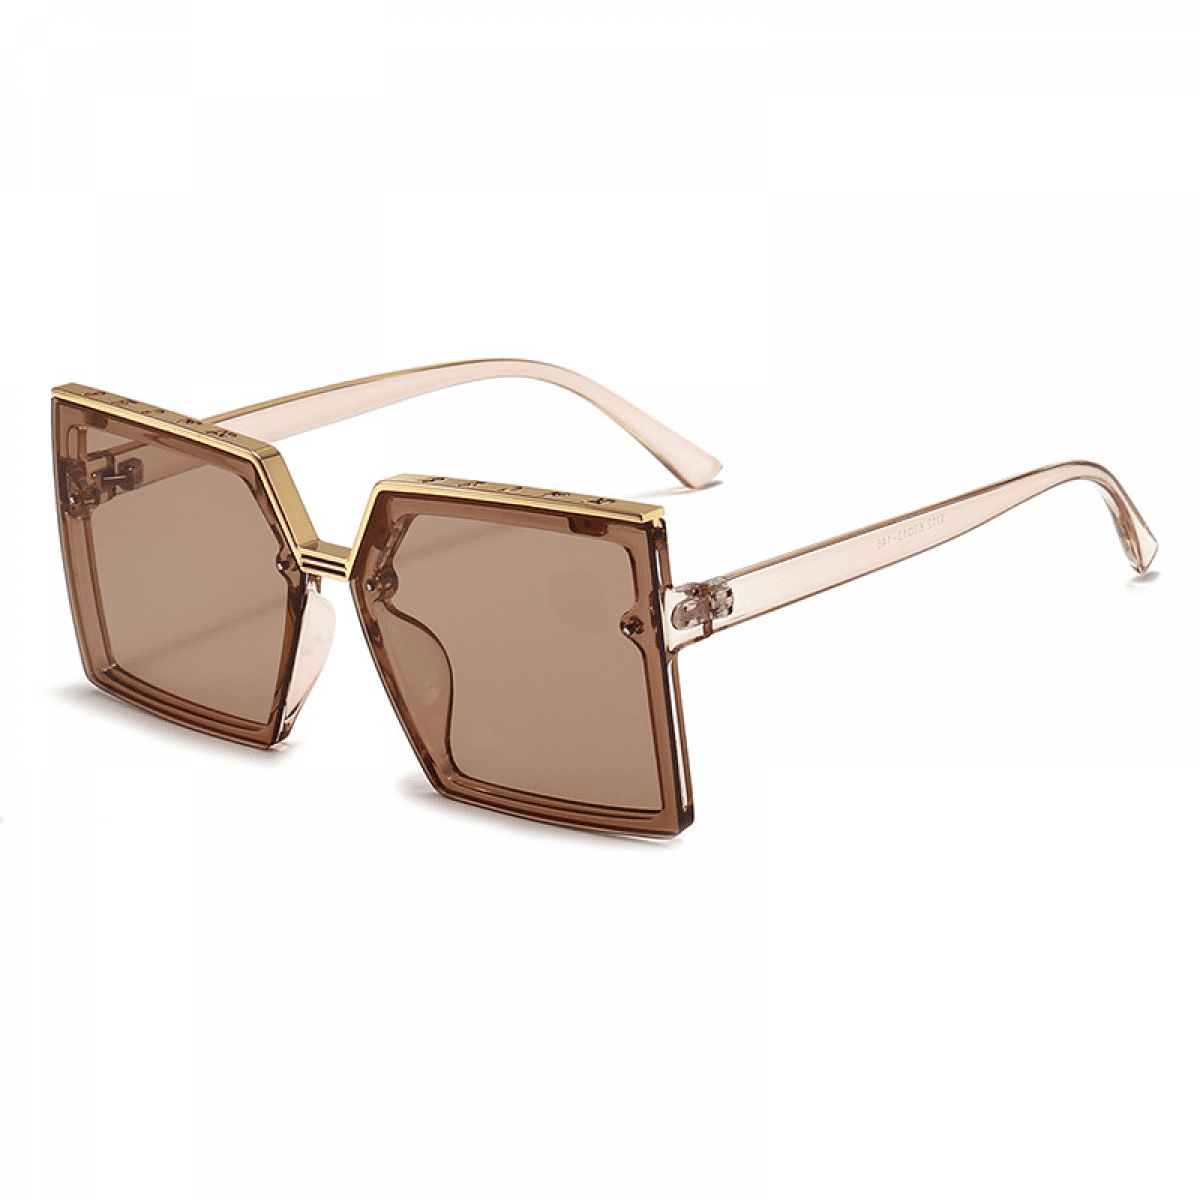 Brown Cat Eye Vintage Sunglasses Thick Unique Frame and Brown Lens Ellie 